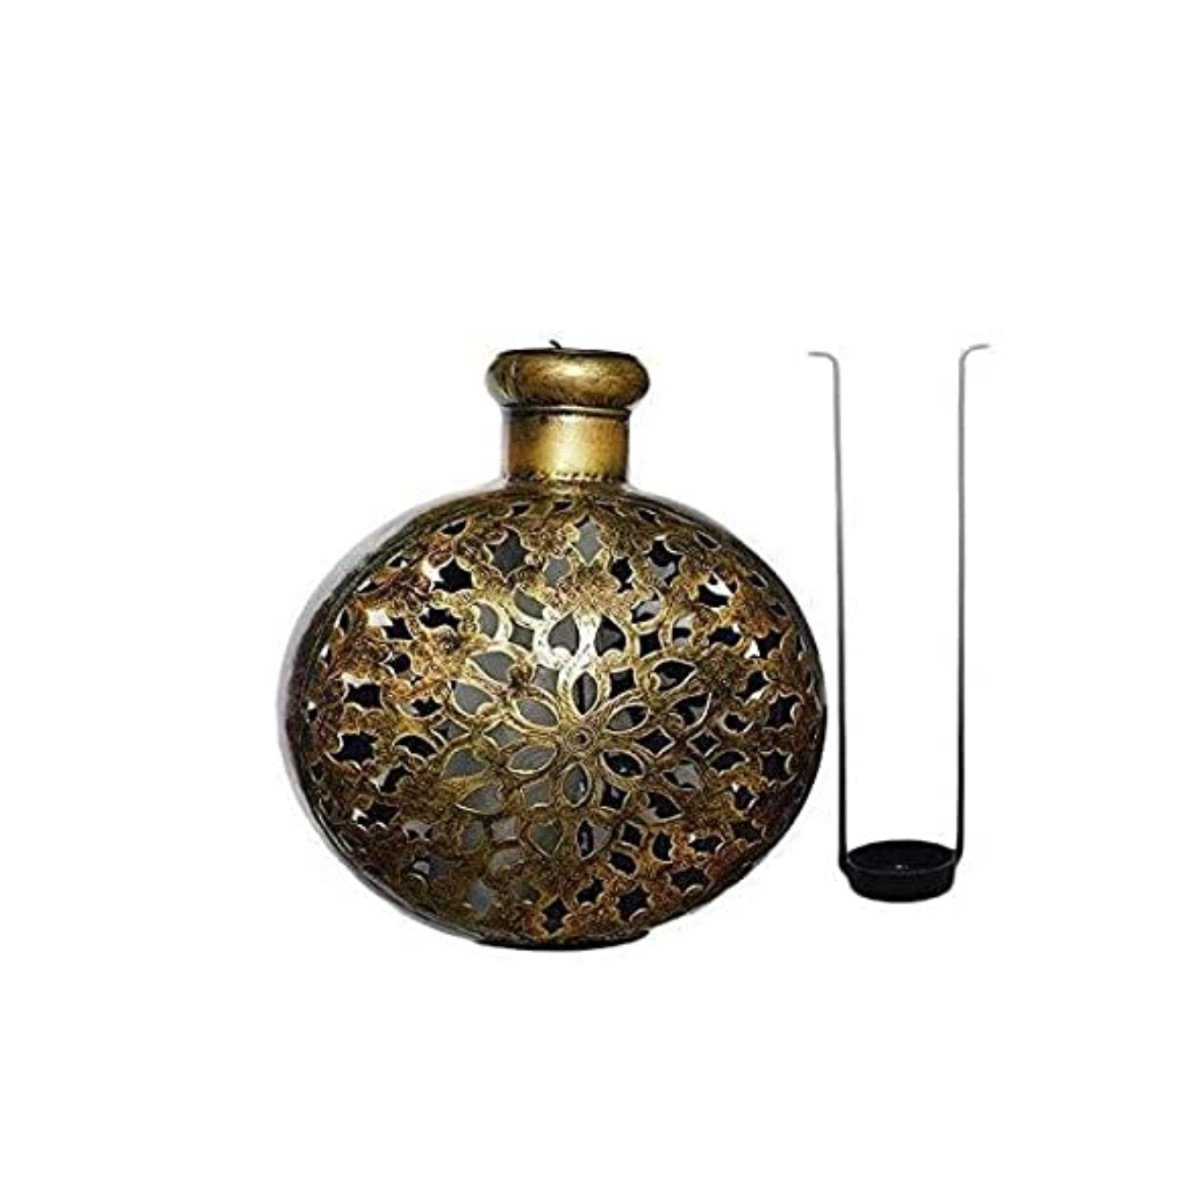 Metallic Flask Shaped T-LITE Table décor (15*9*14 Inches approx)